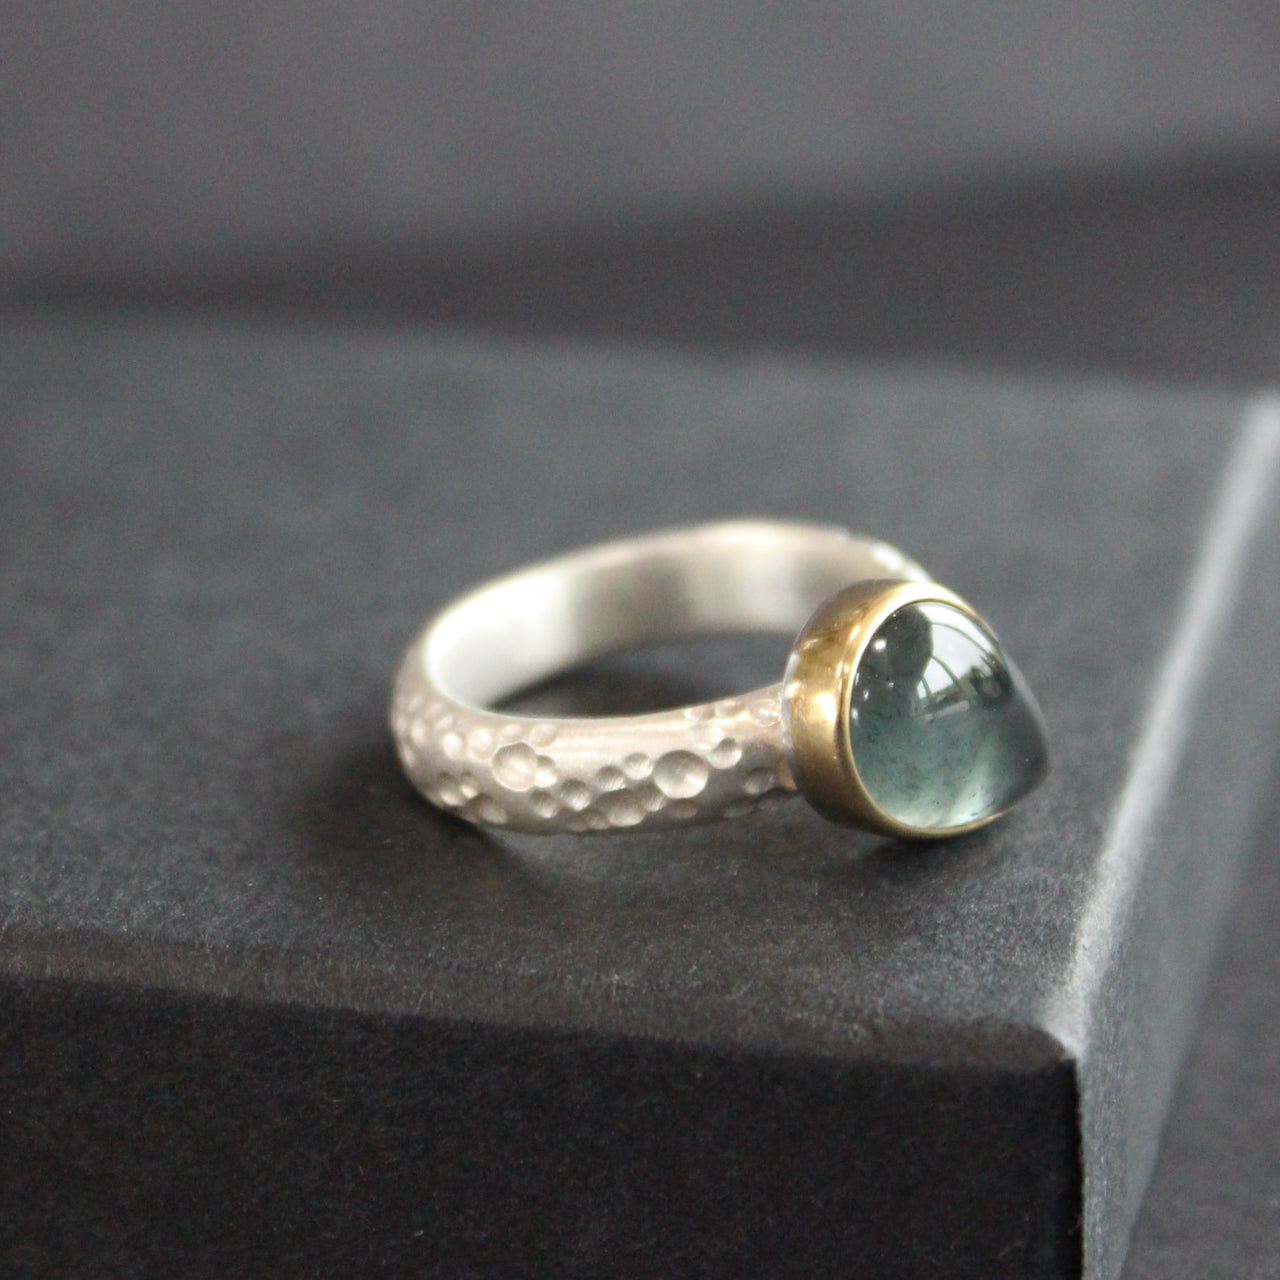 Carin Lindberg jewellery designer silver ring with teardrop shaped blue grey stone in gold setting 